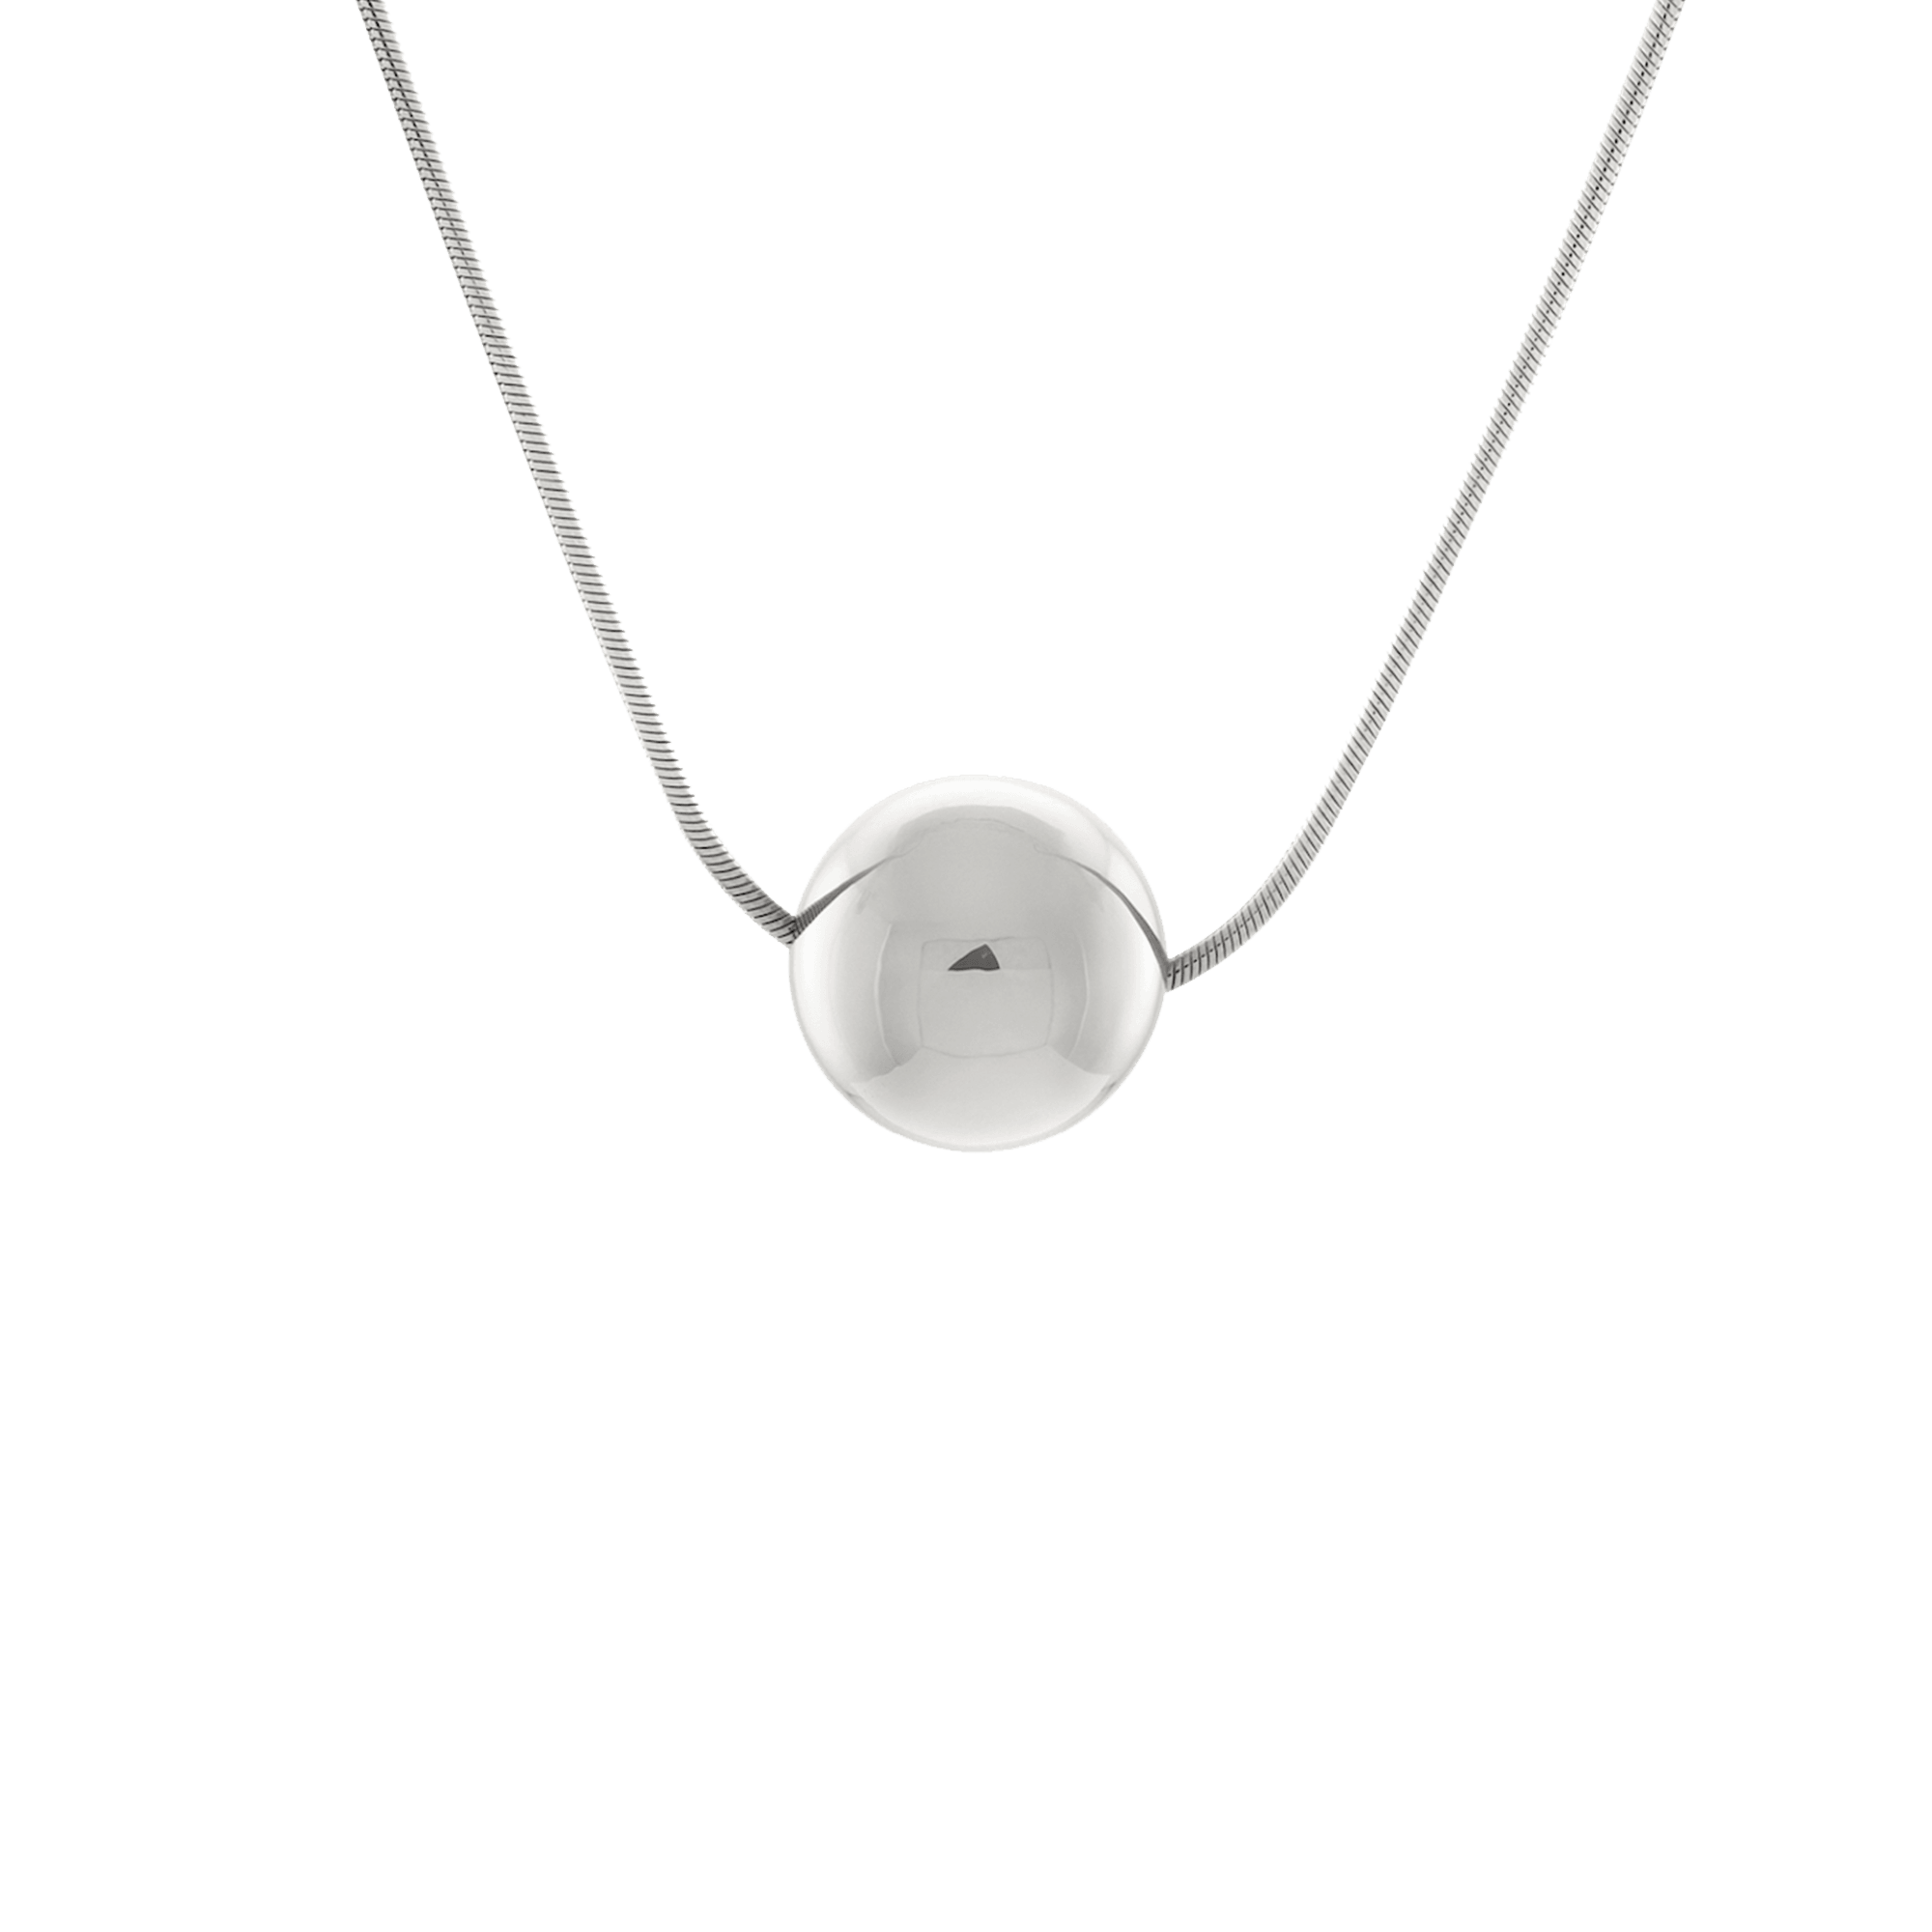 Josephine Orb Necklace | 925 Sterling silver / Chain length 440 mm / 17.3 in  | Jewelry | The Future Rocks